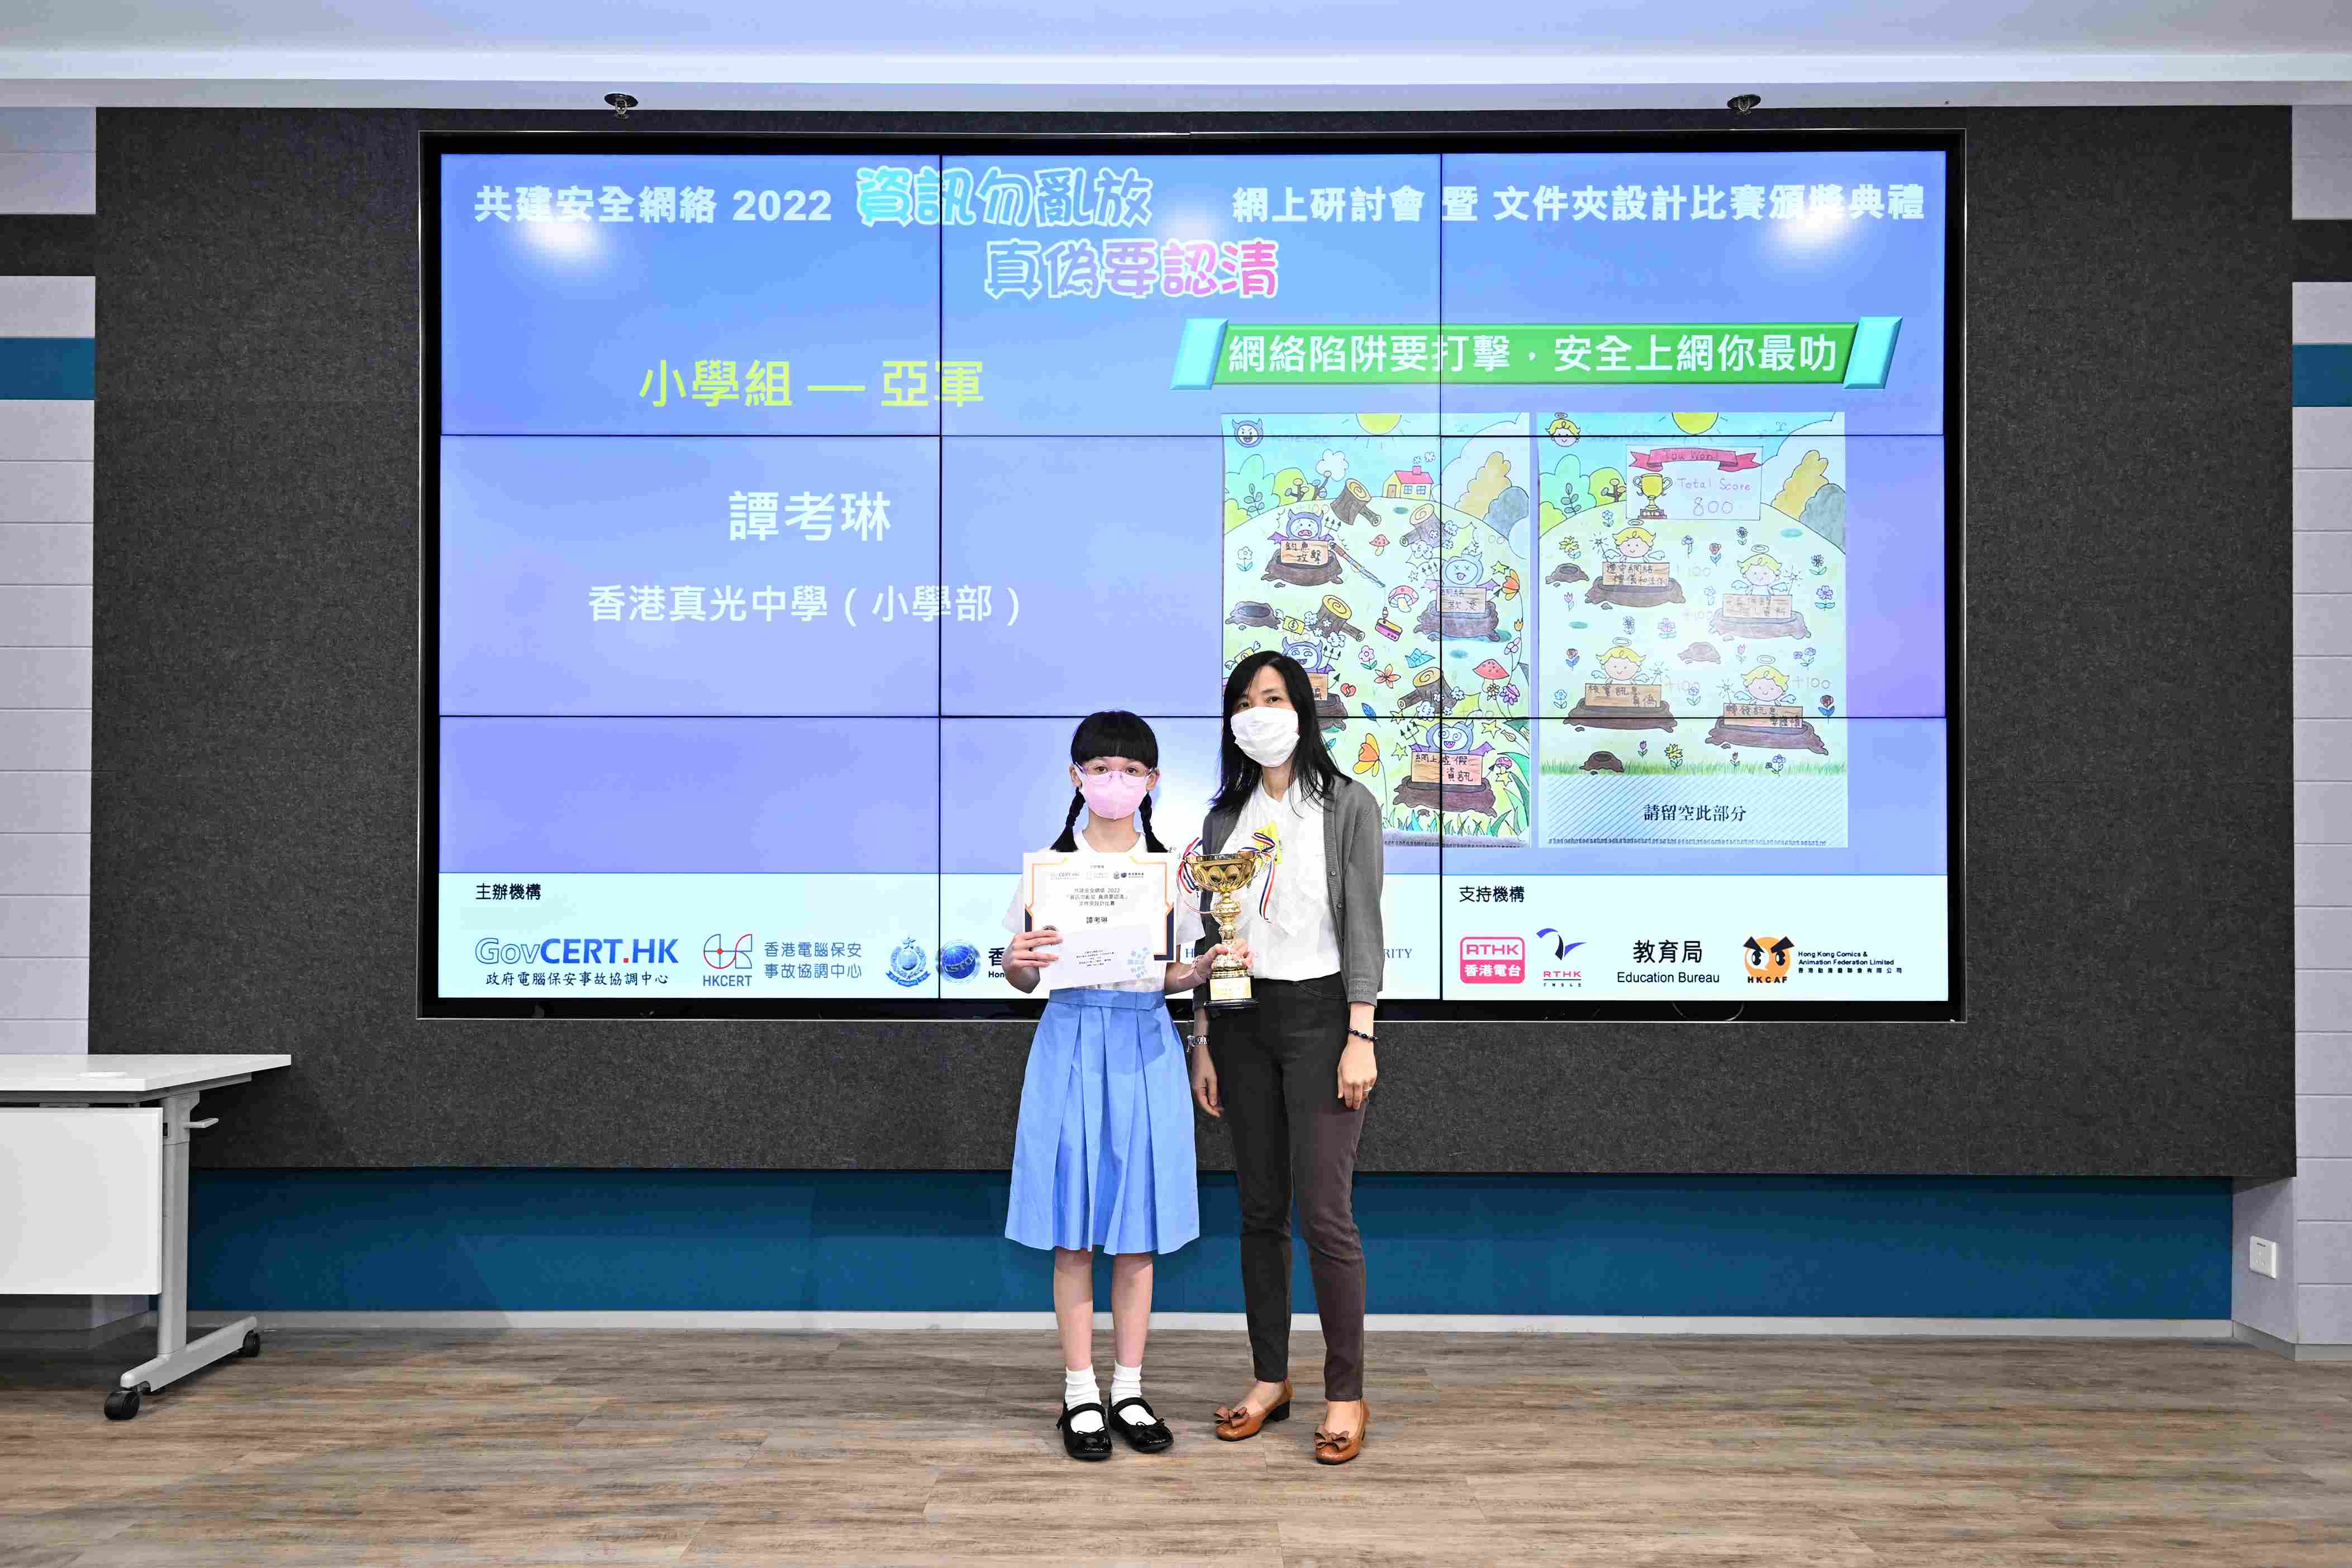 1st Runner-up of Primary School Group - Tam Hau Lam Ashlynn (The True Light Middle School of Hong Kong (Primary Section))